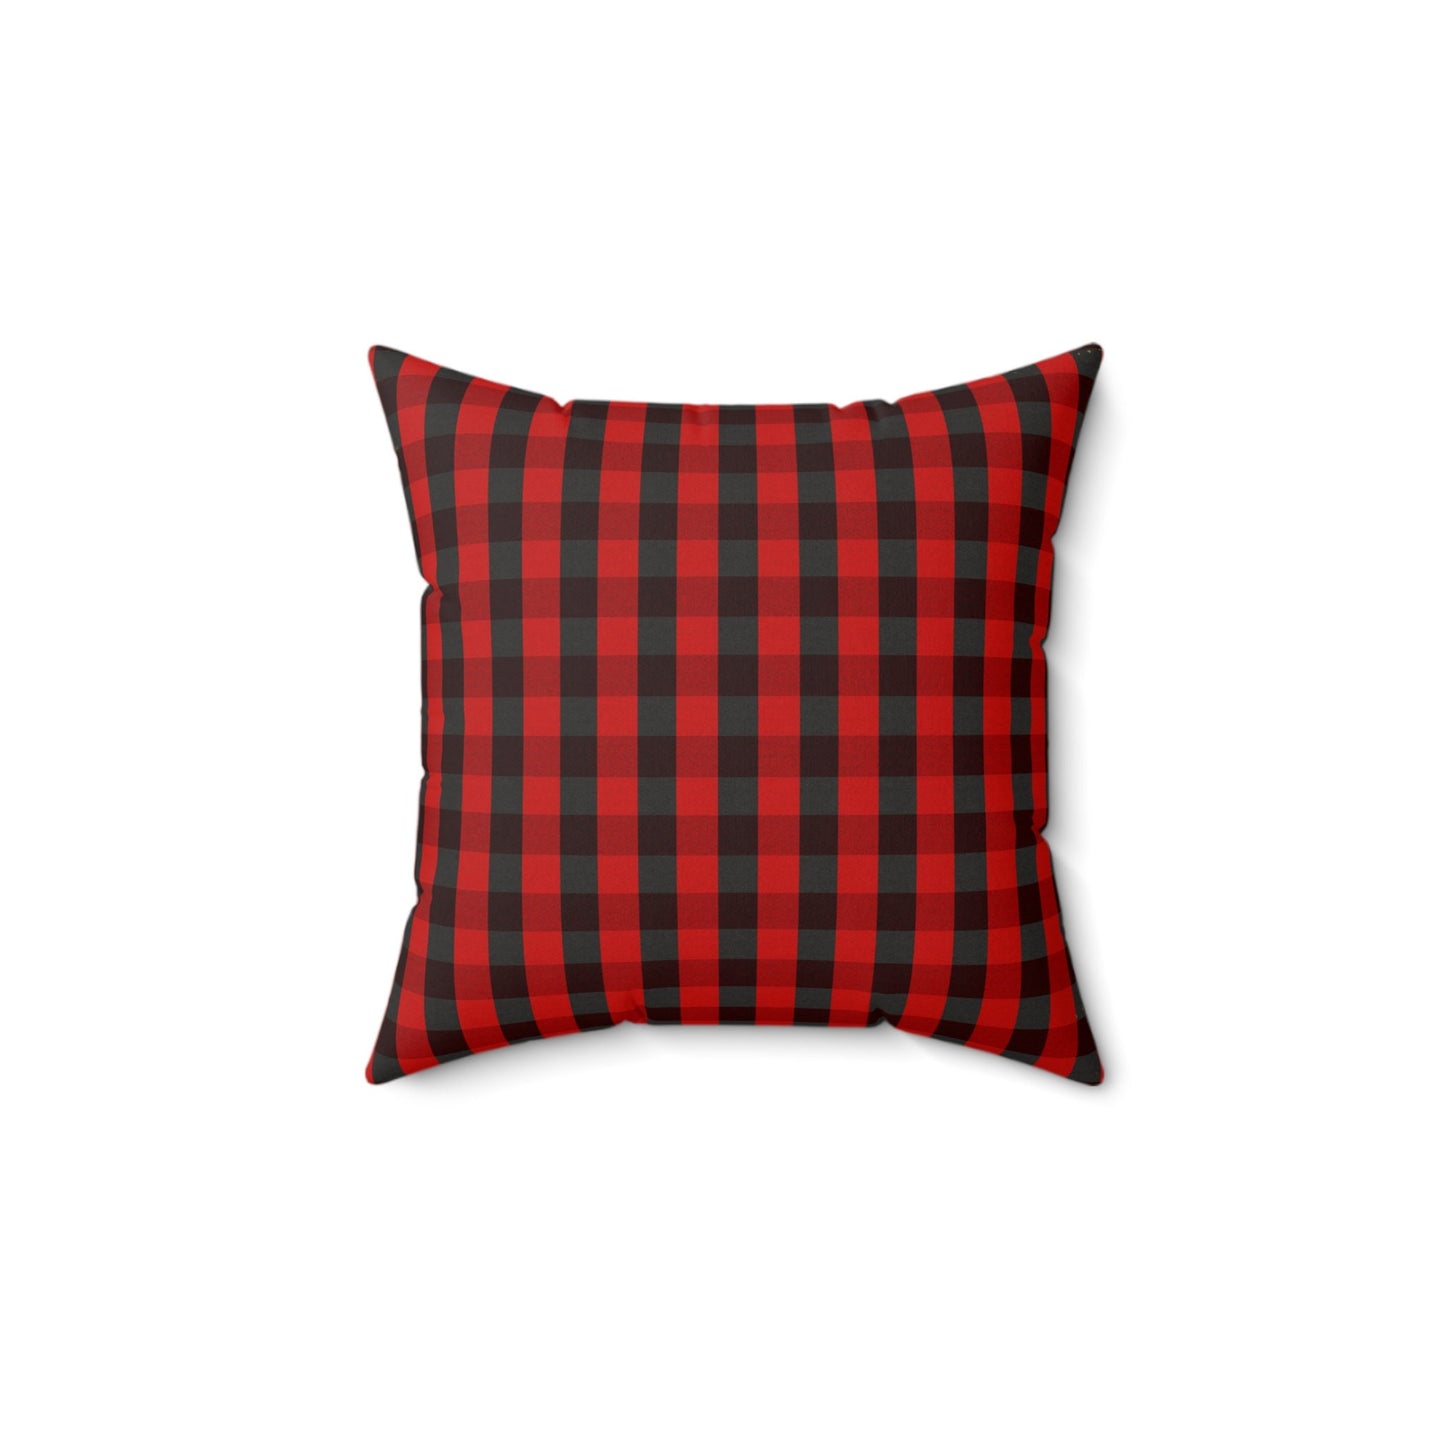 Christmas Plaid Pillow with Vintage Santa | Red and Black Plaid | Multiple Sizes